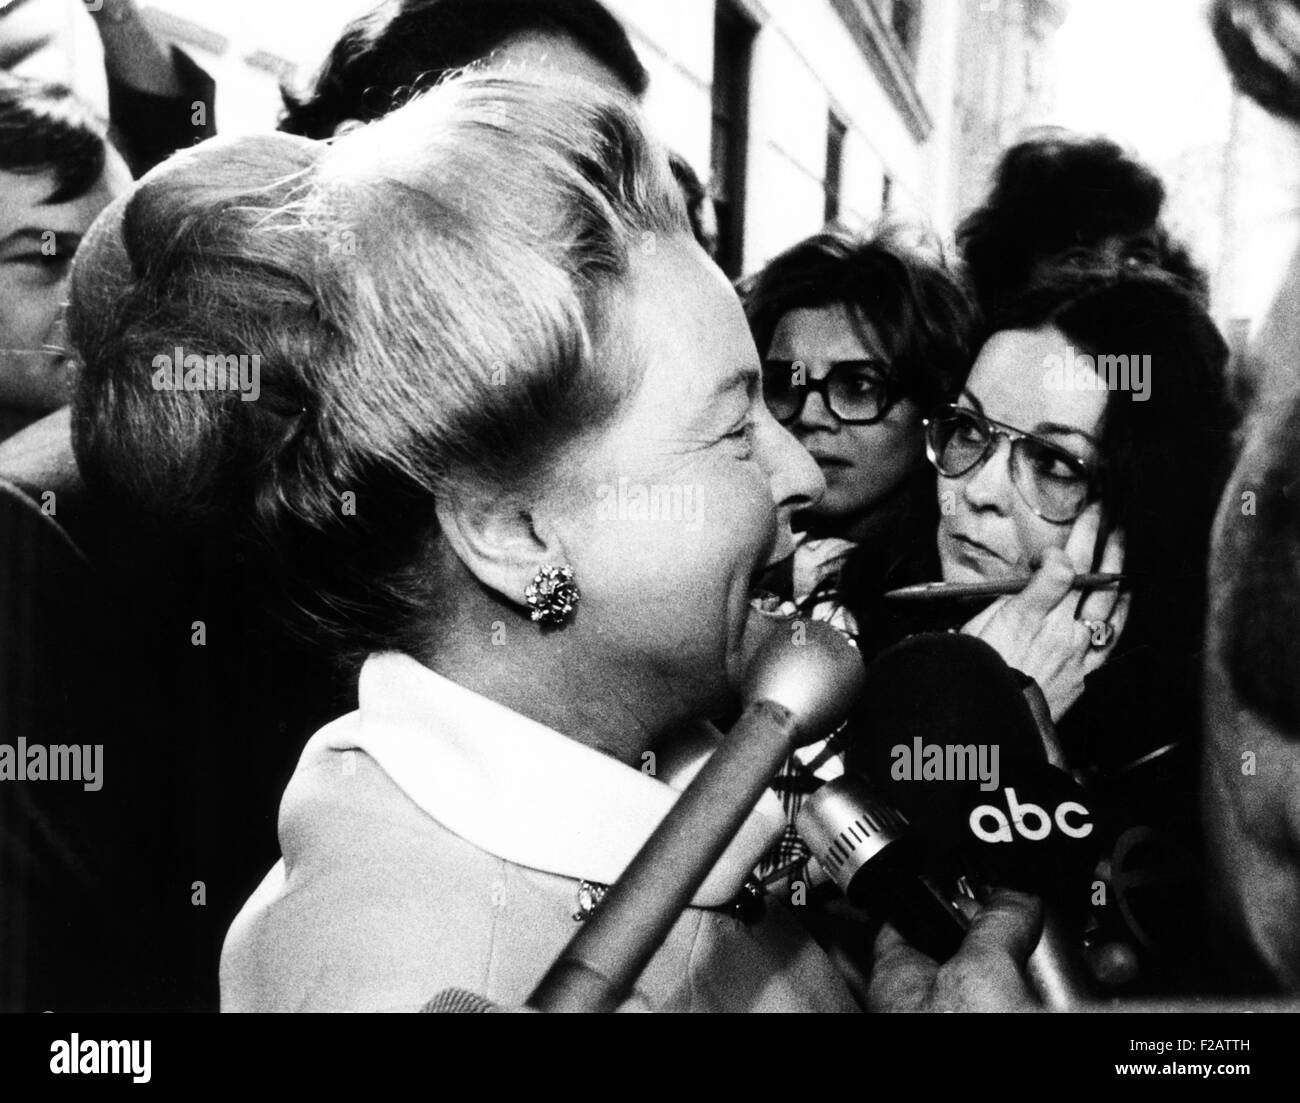 Martha Mitchell talks to the press outside her New York apartment on May 3, 1973. She said her husband, former Atty. Gen. John Mitchell, assured her that he was not involved in wrongdoing in the Watergate case. She indiscreetly added, 'I trust and pray to God that he was not.' Mitchell was indicted and convicted for Watergate cover-up. (CSU 2015 11 1607) Stock Photo